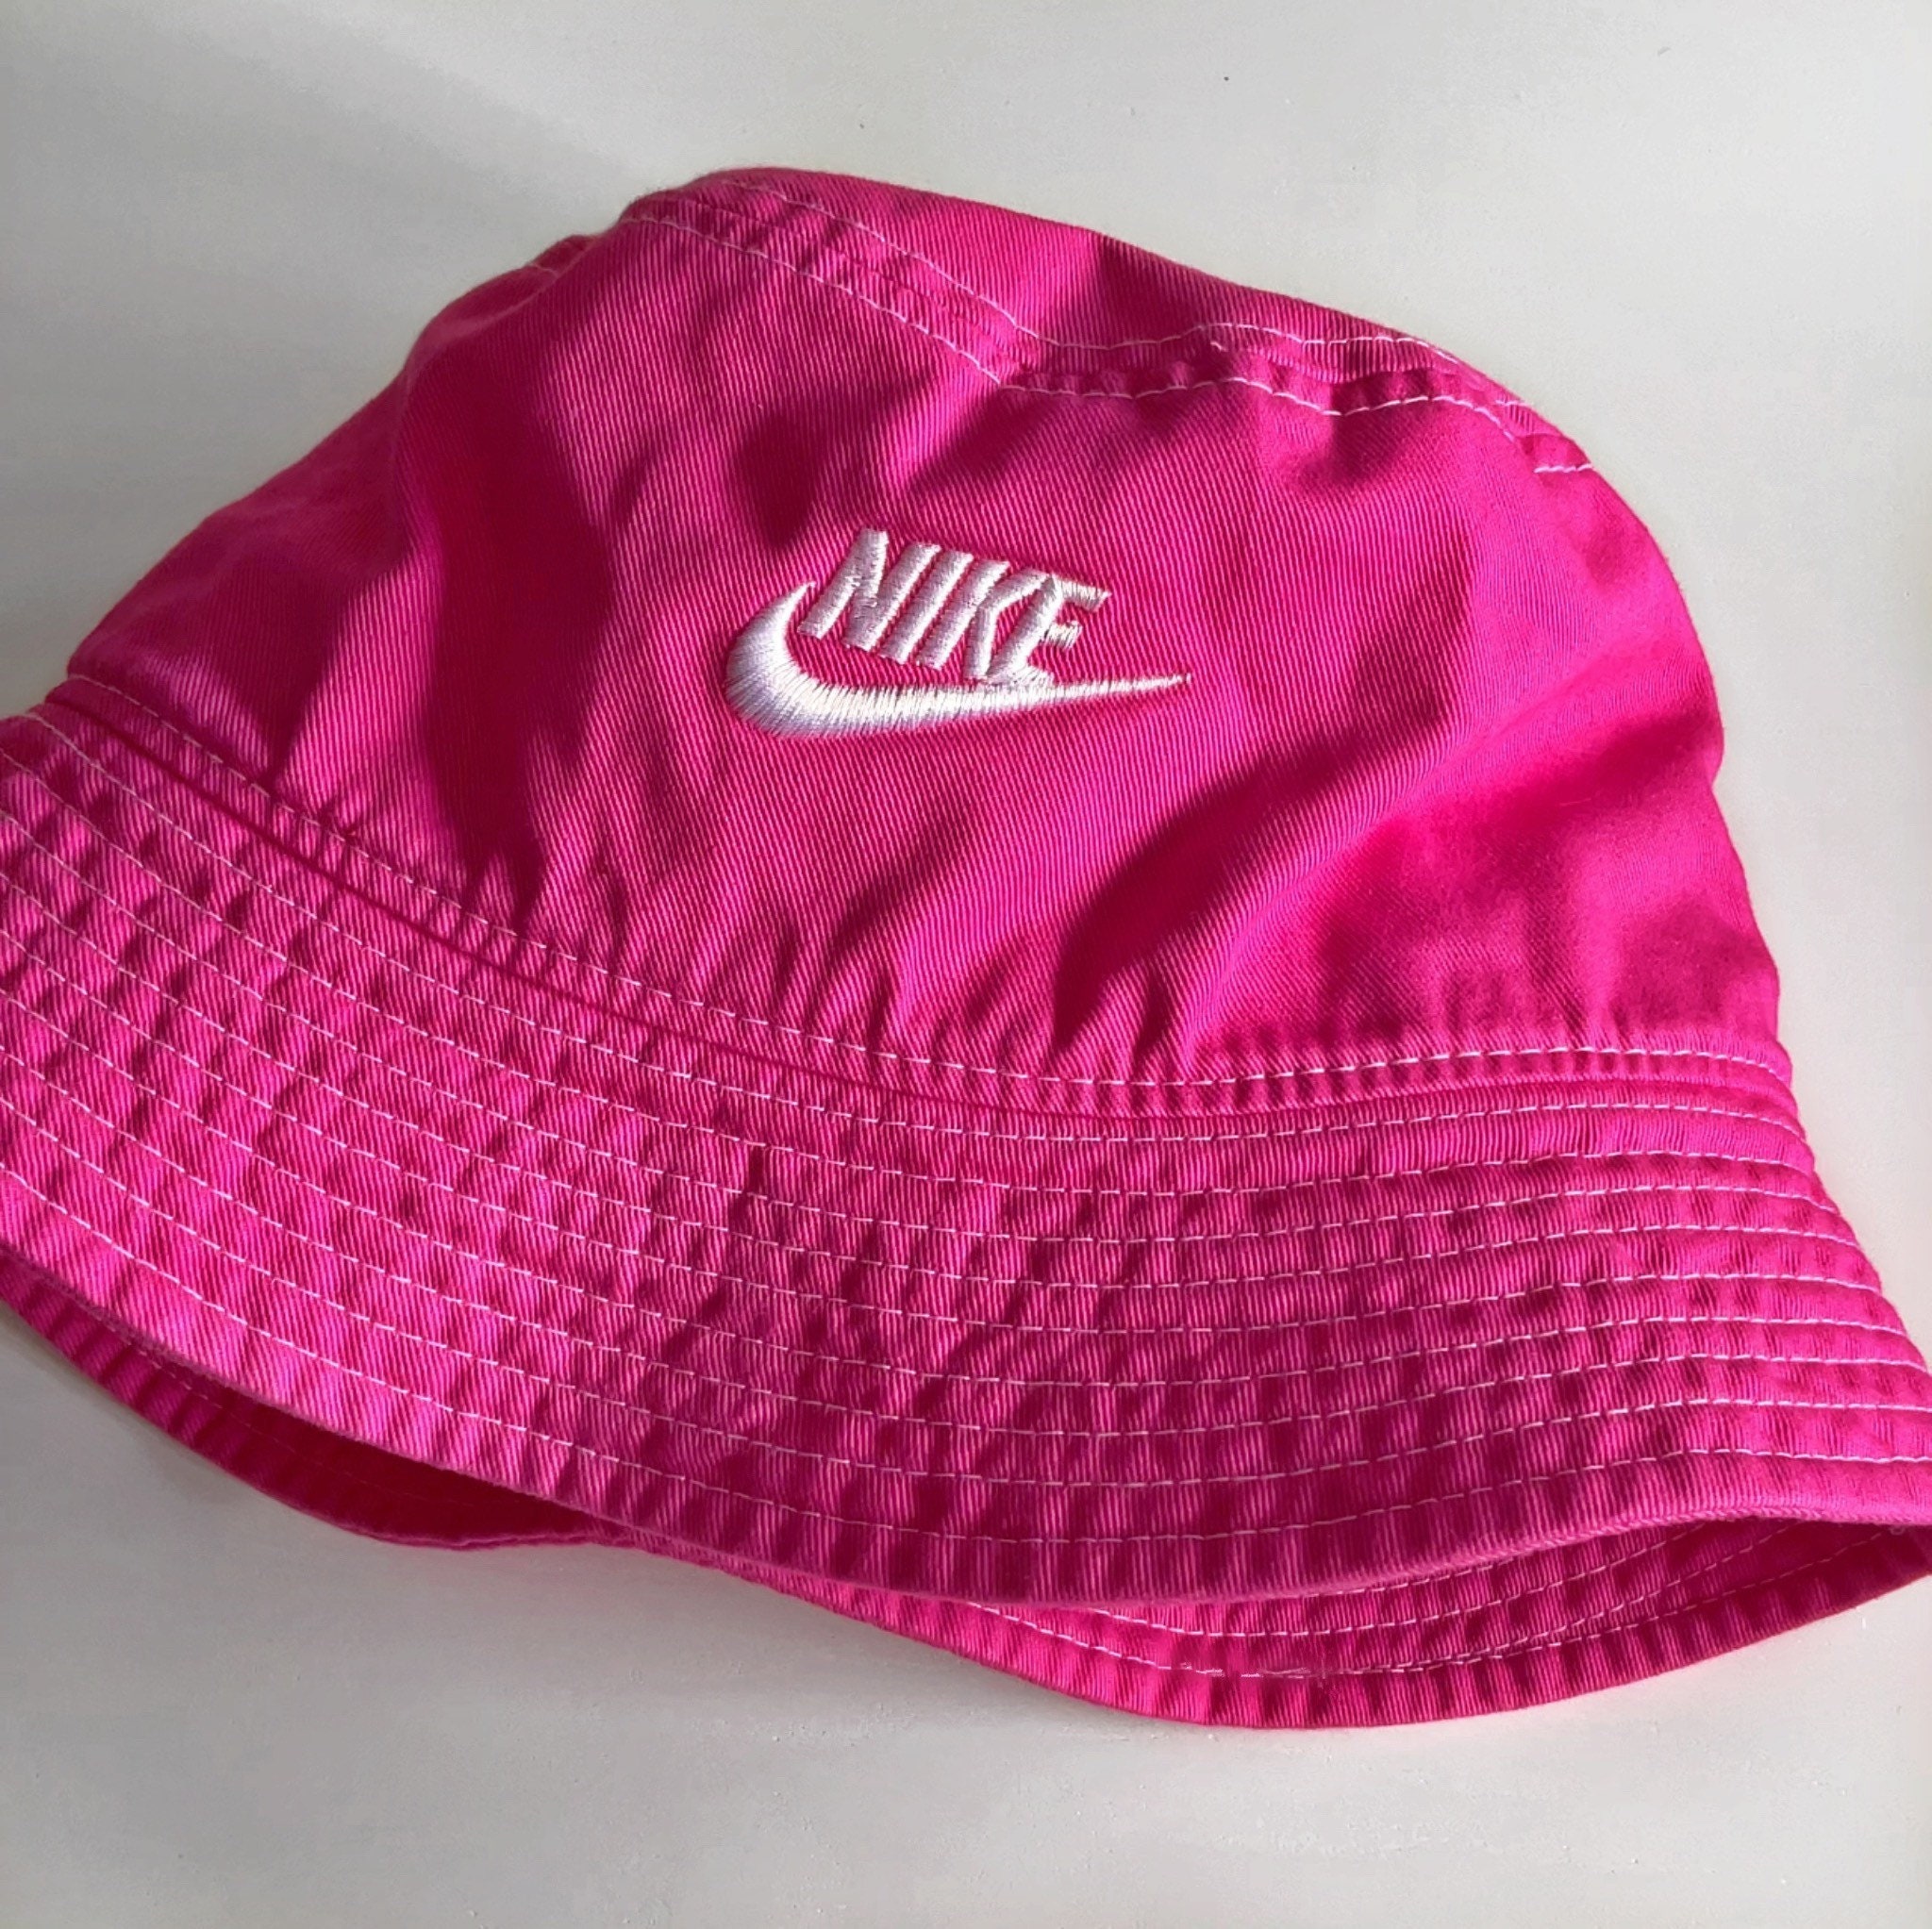 Hand Dyed Nike Bucket Hat in Colour FUCHSIA Pink Bucket - Etsy